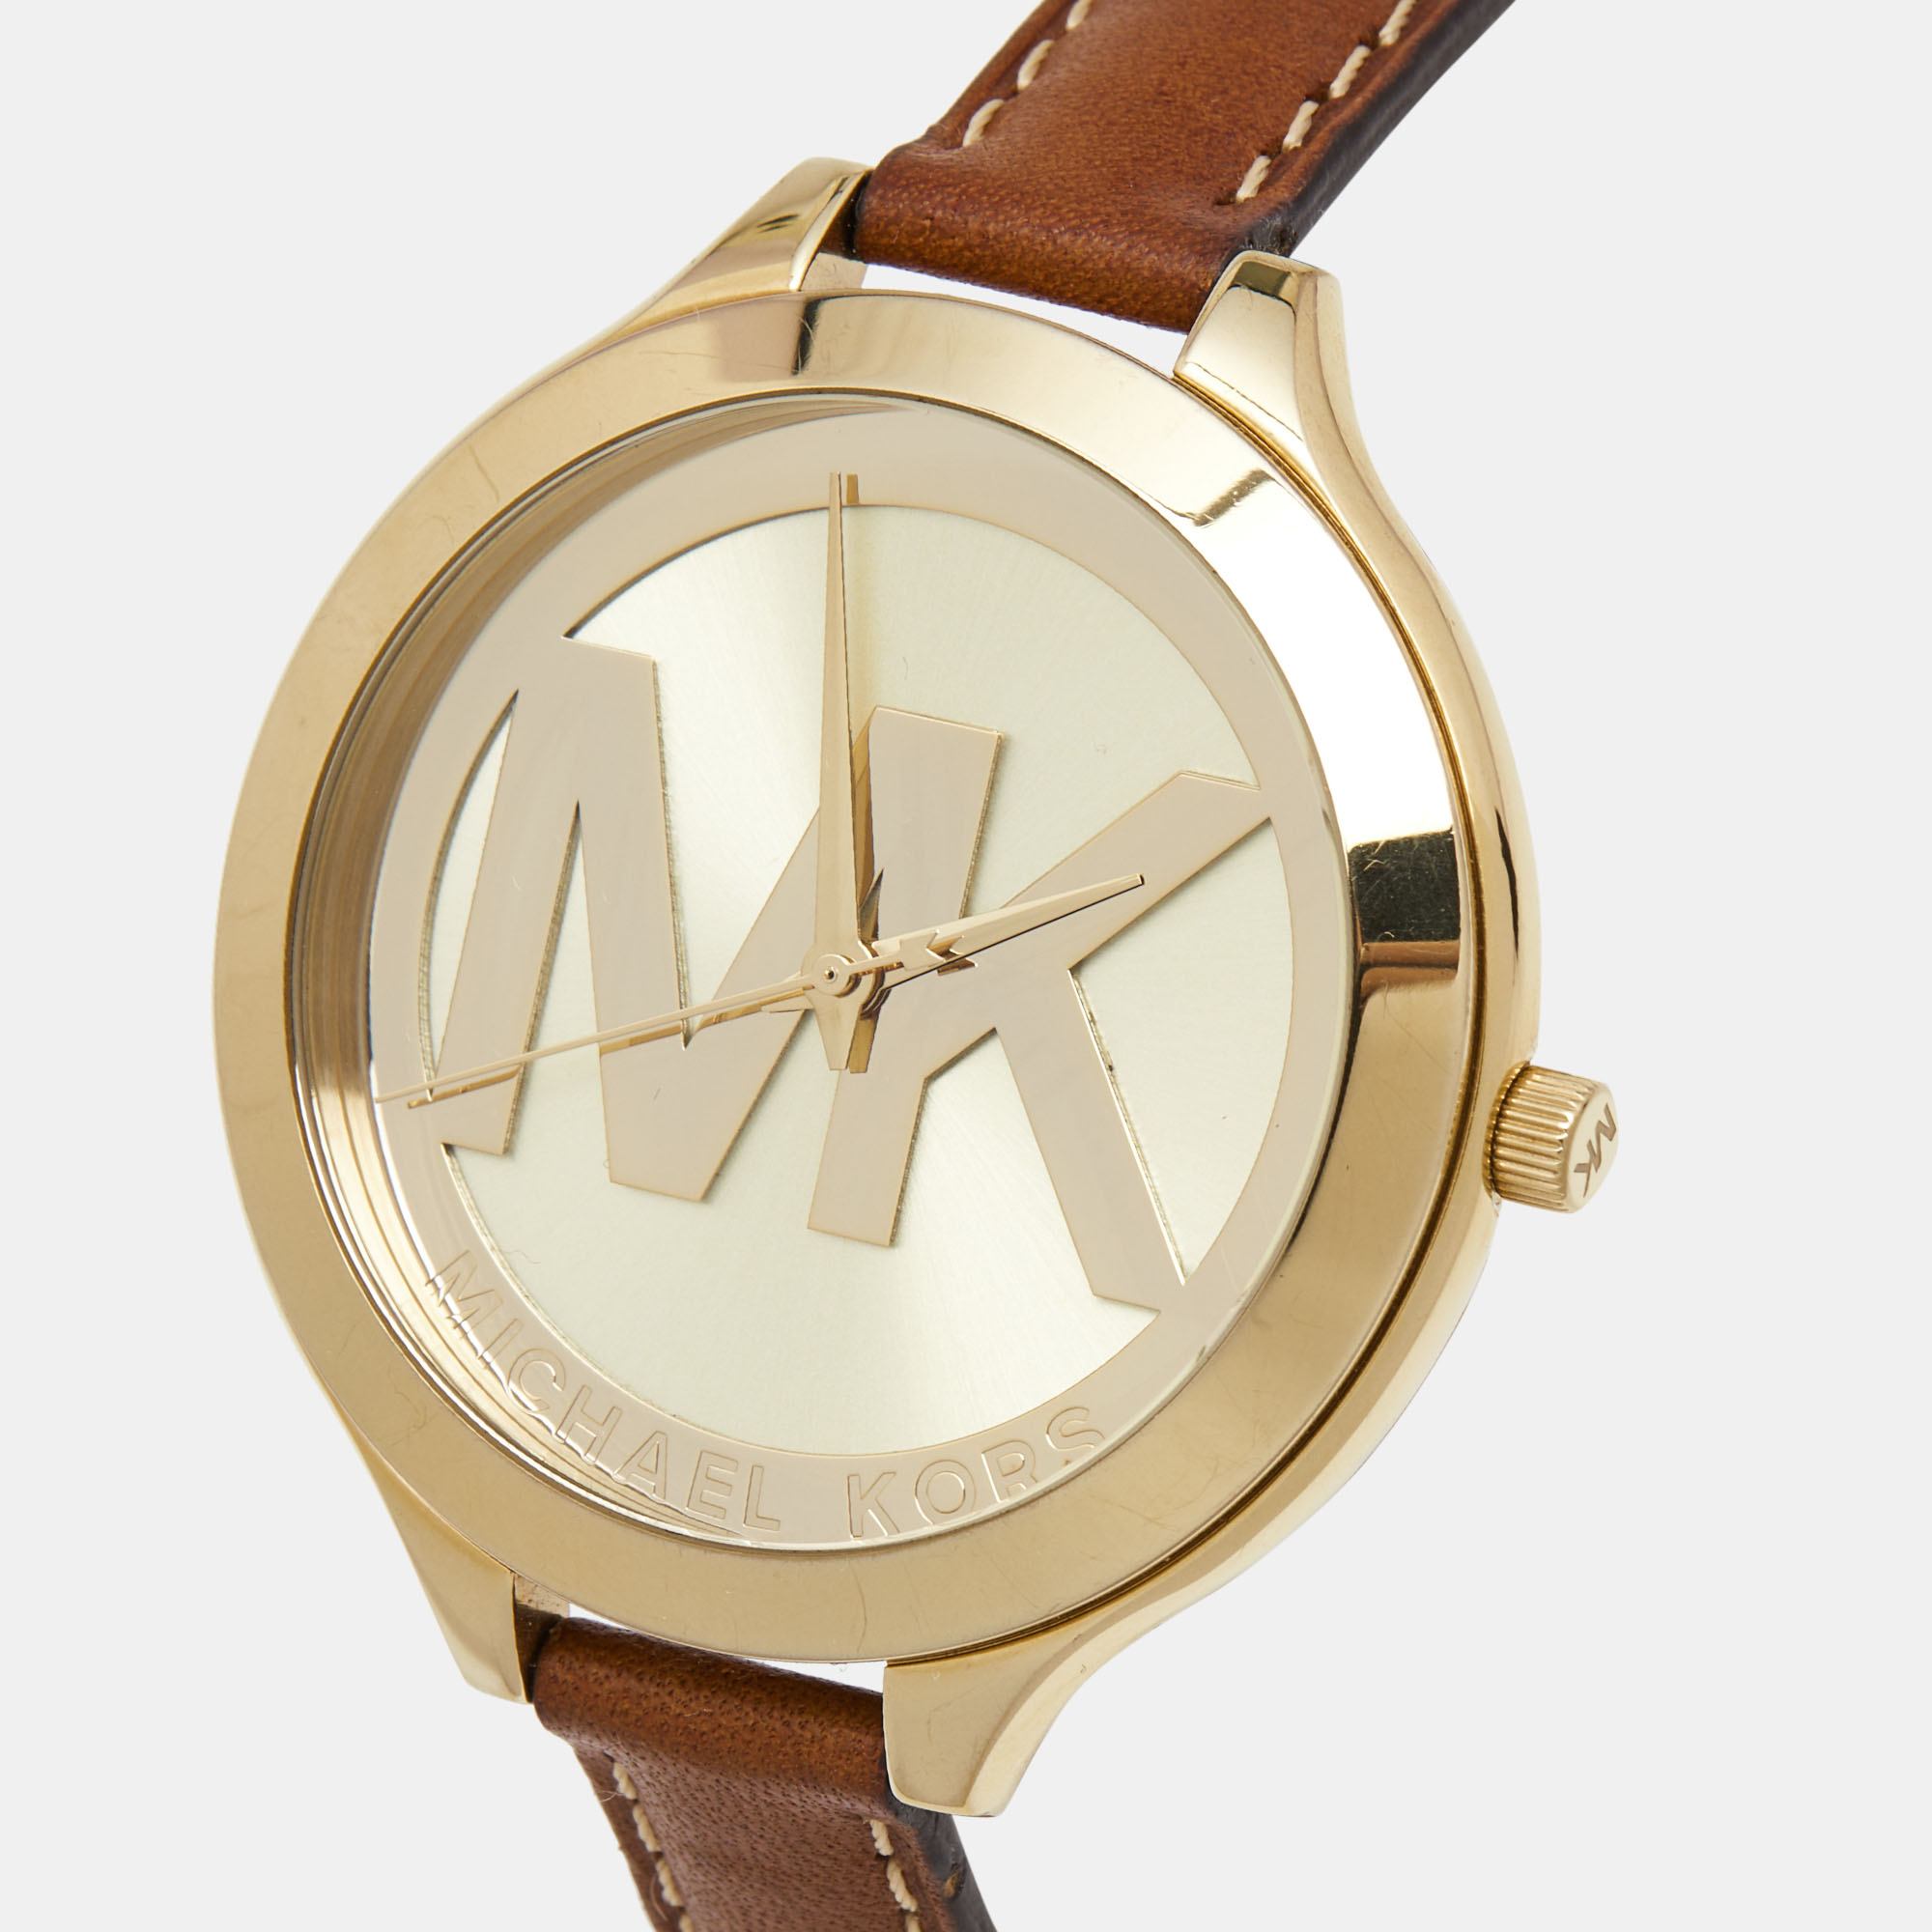 

Michael Kors Champagne Gold Plated Stainless Steel Leather Slim Runway MK2326 Women's Wristwatch